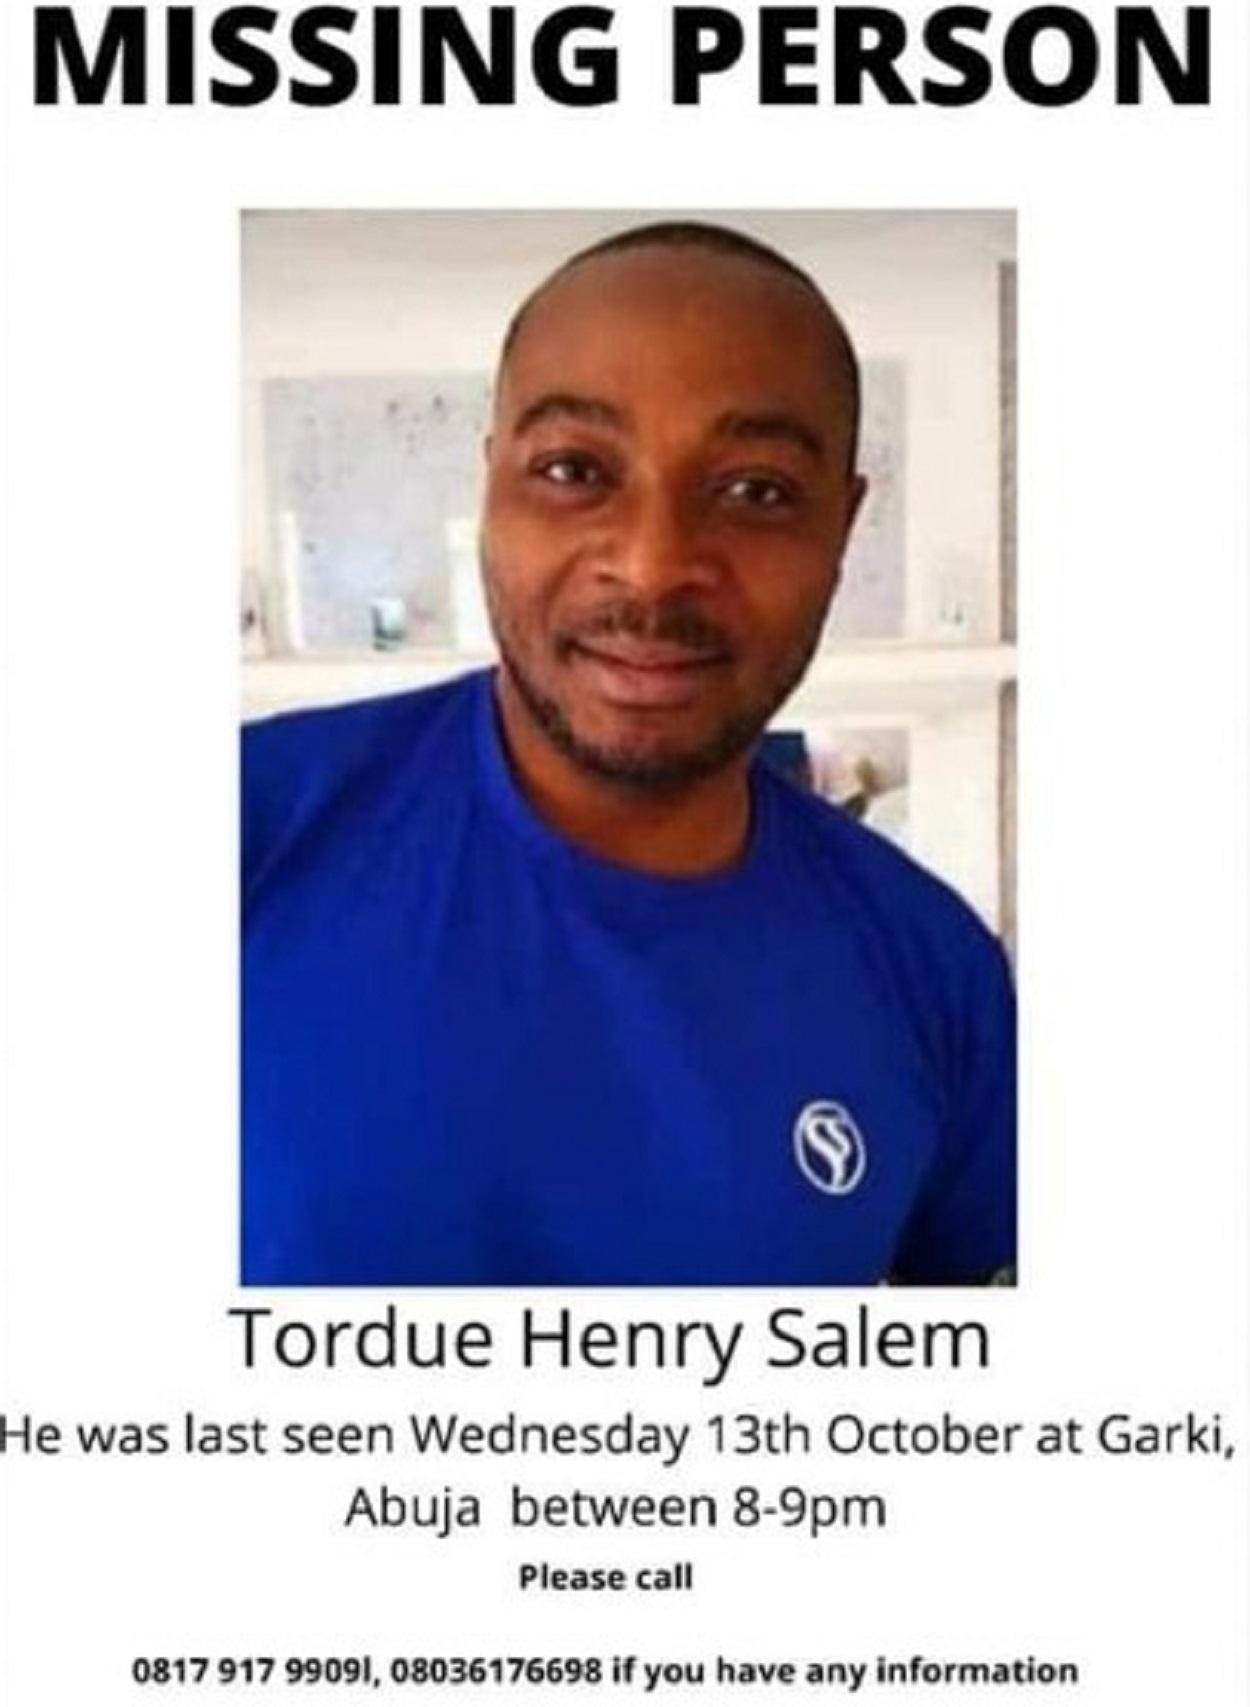 Tordue Salem: It's hit-and-run, Police claim; parade suspect